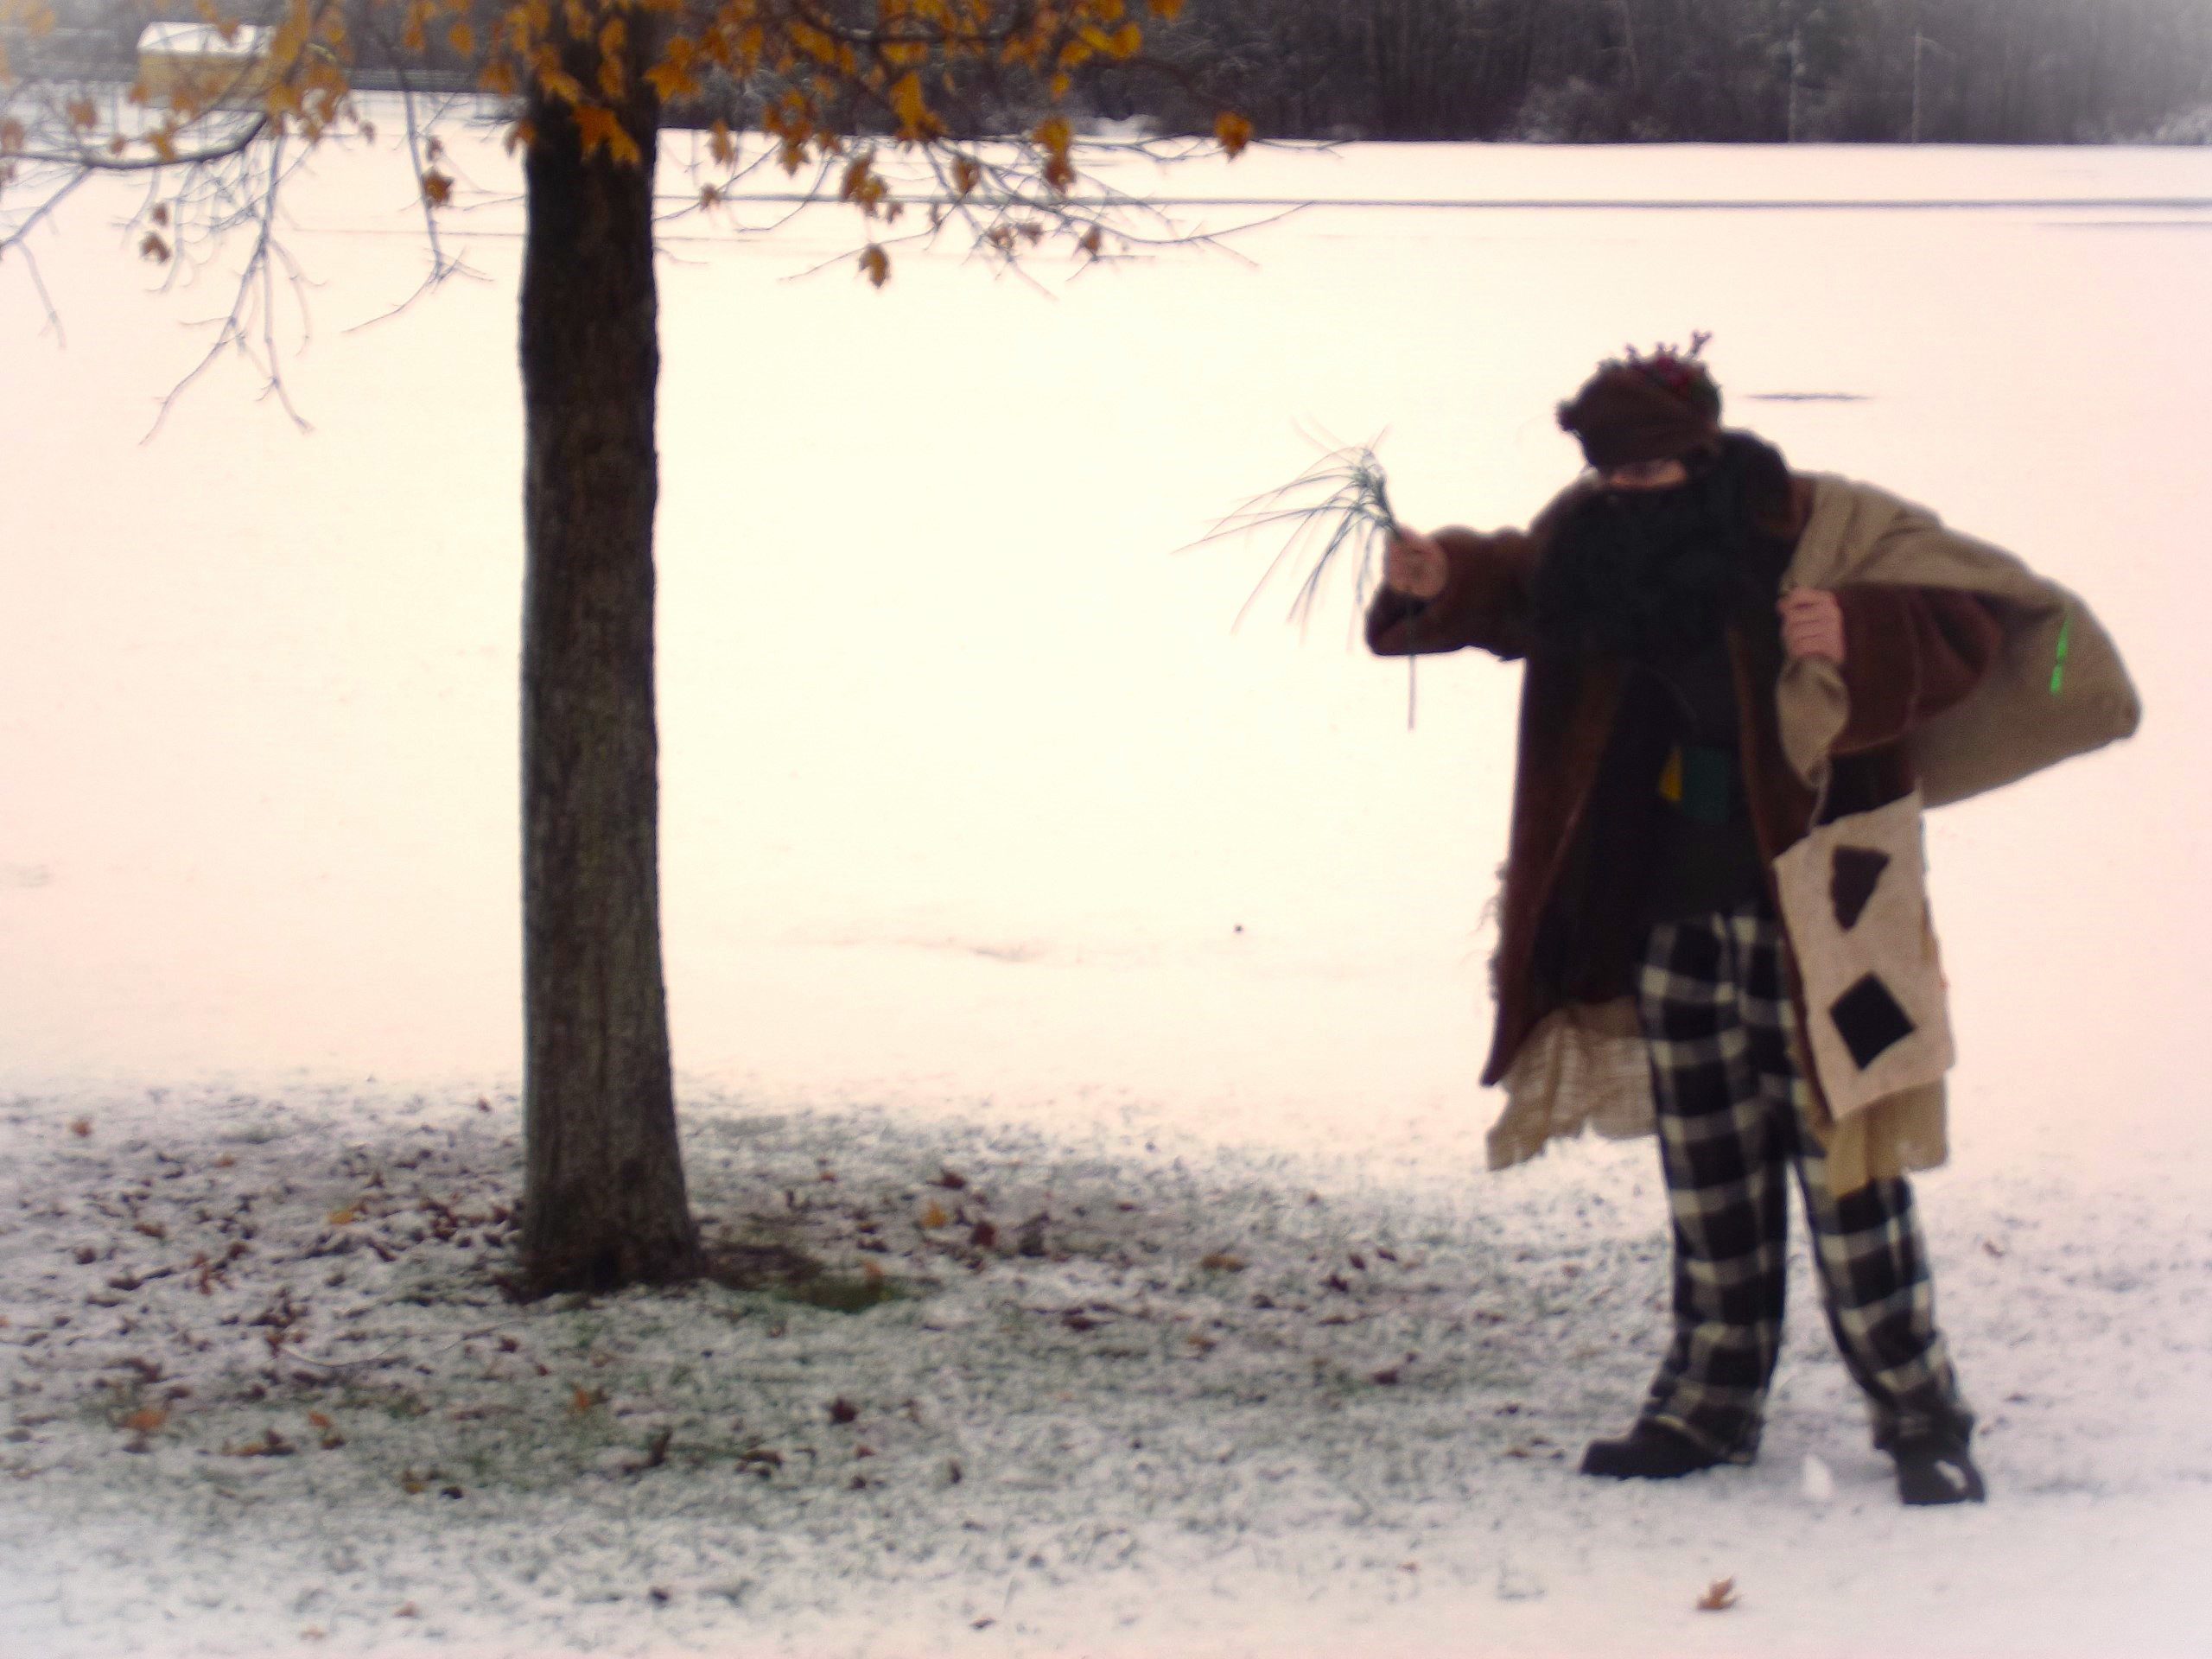 Modern-day Belsnickel on his way to scare children in the schools in Norwich, New York.